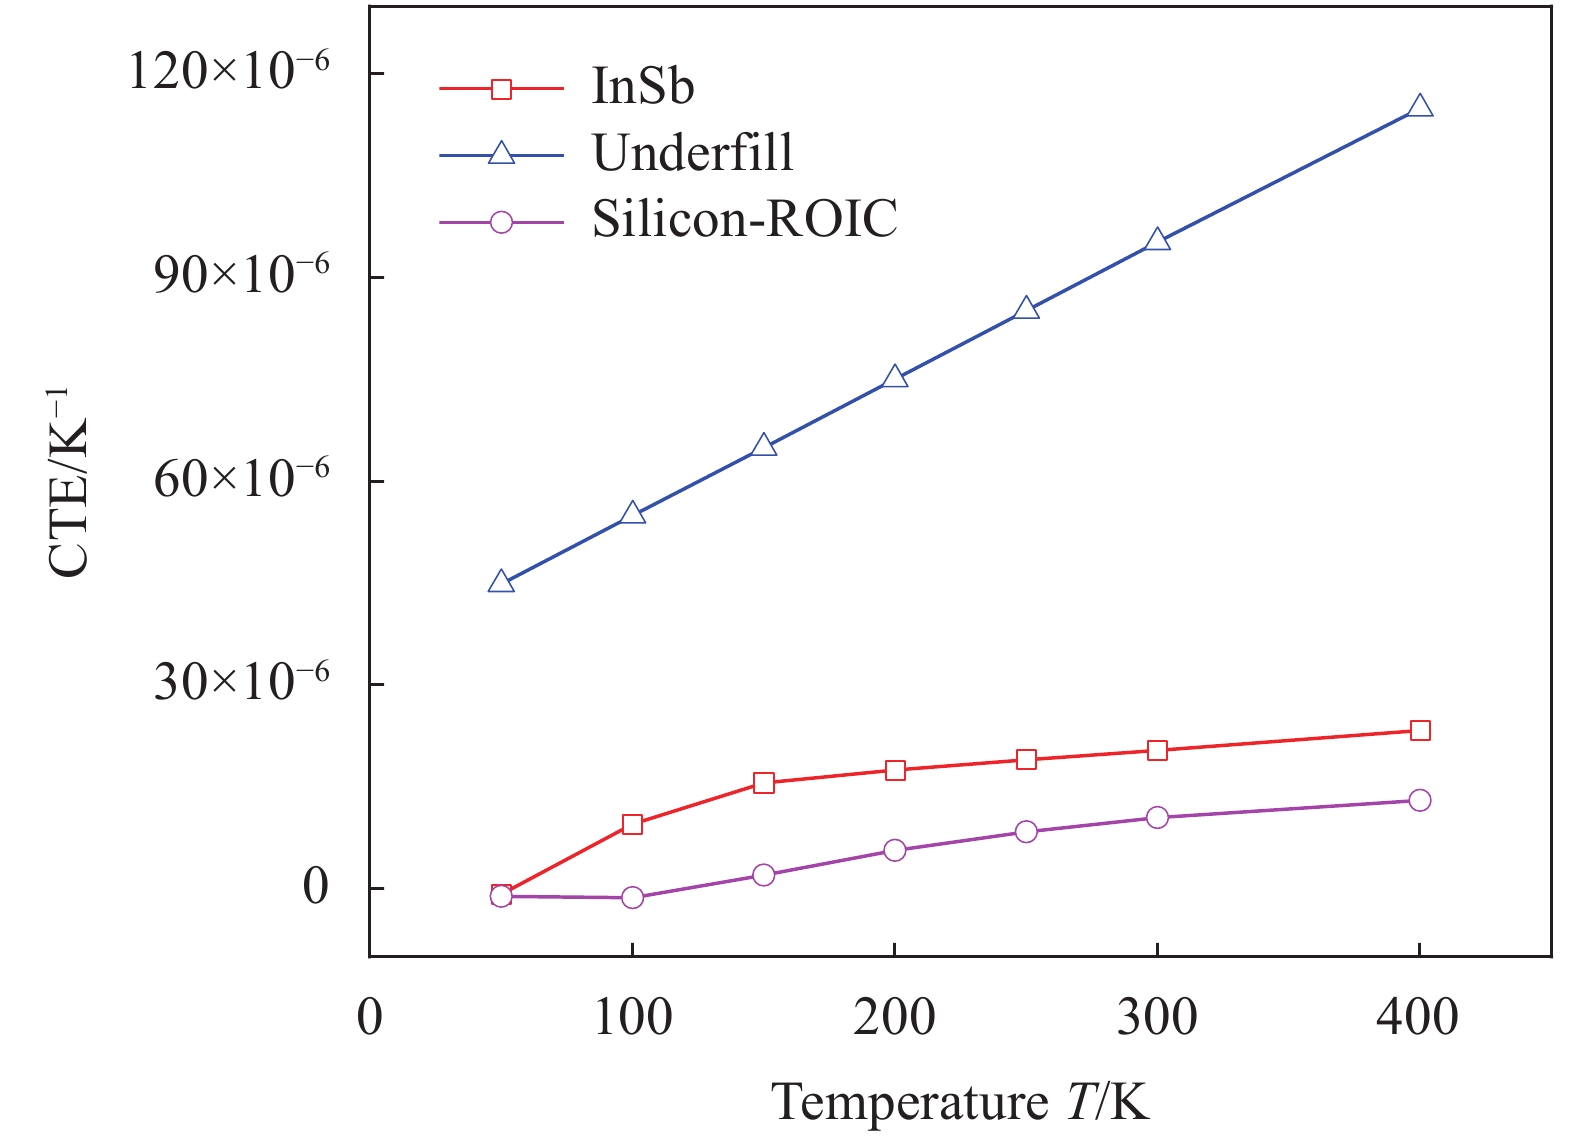 Coefficients of thermal expansion (CTE) depending on temperature for InSb, underfill and Silicon-ROIC